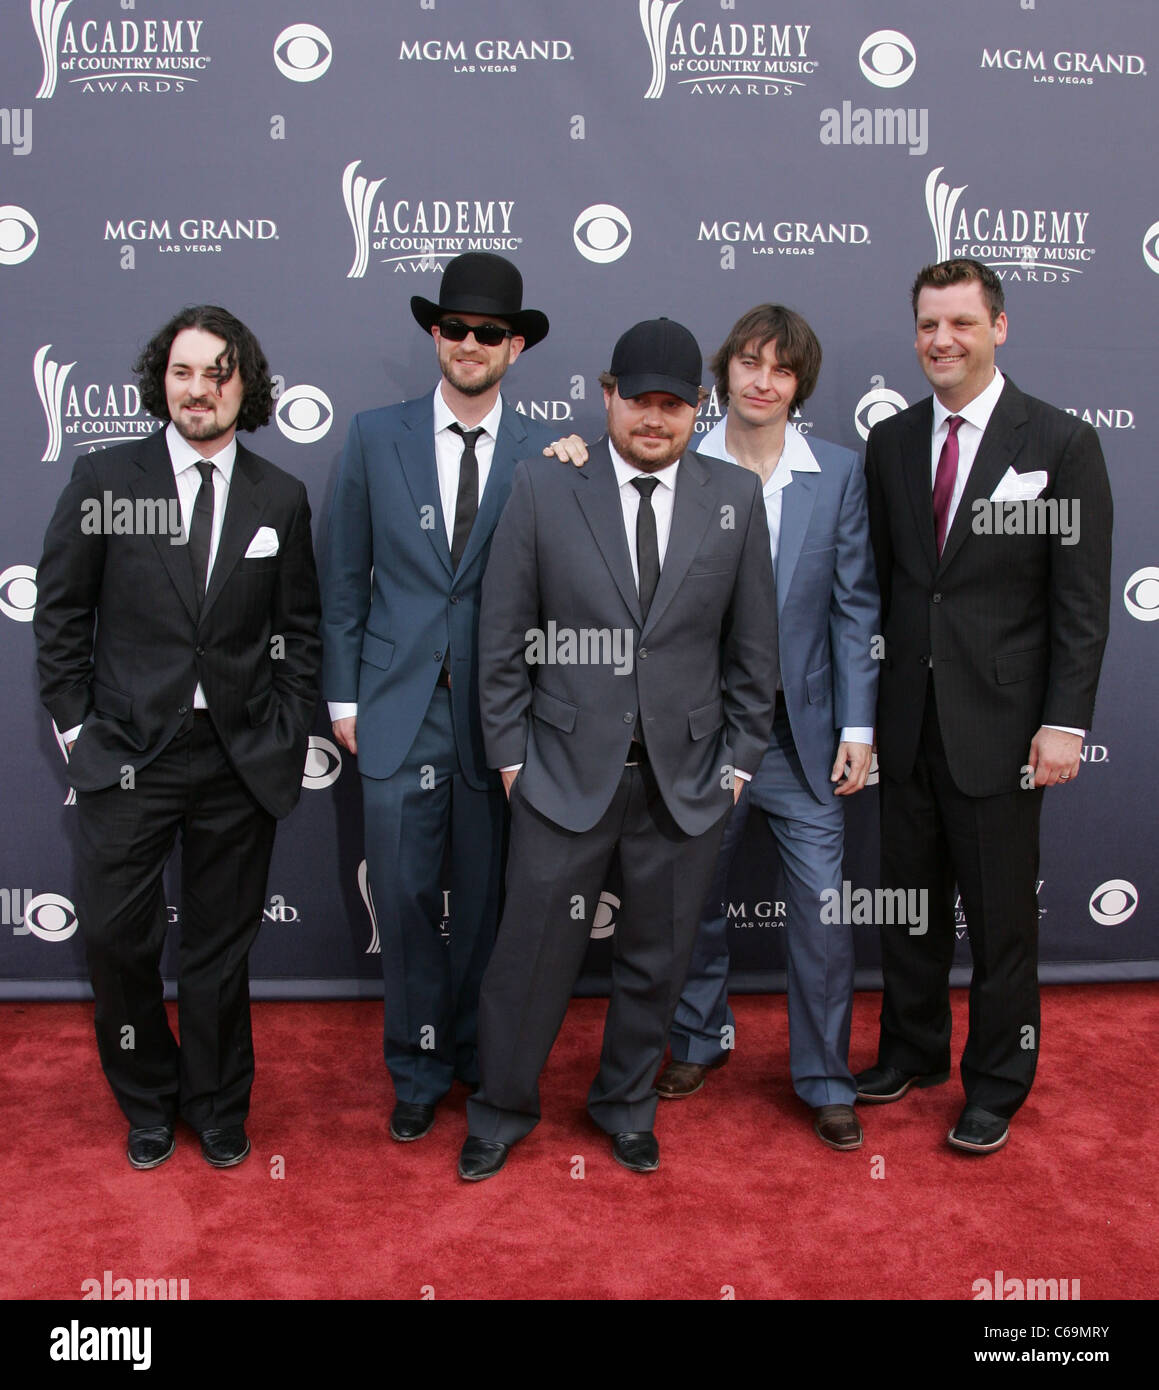 Randy Rogers Band at arrivals for Academy of Country Music ACM Awards 2011 - Arrivals, MGM Grand Garden Arena, Las Vegas, NV April 3, 2011. Photo By: James Atoa/Everett Collection Stock Photo